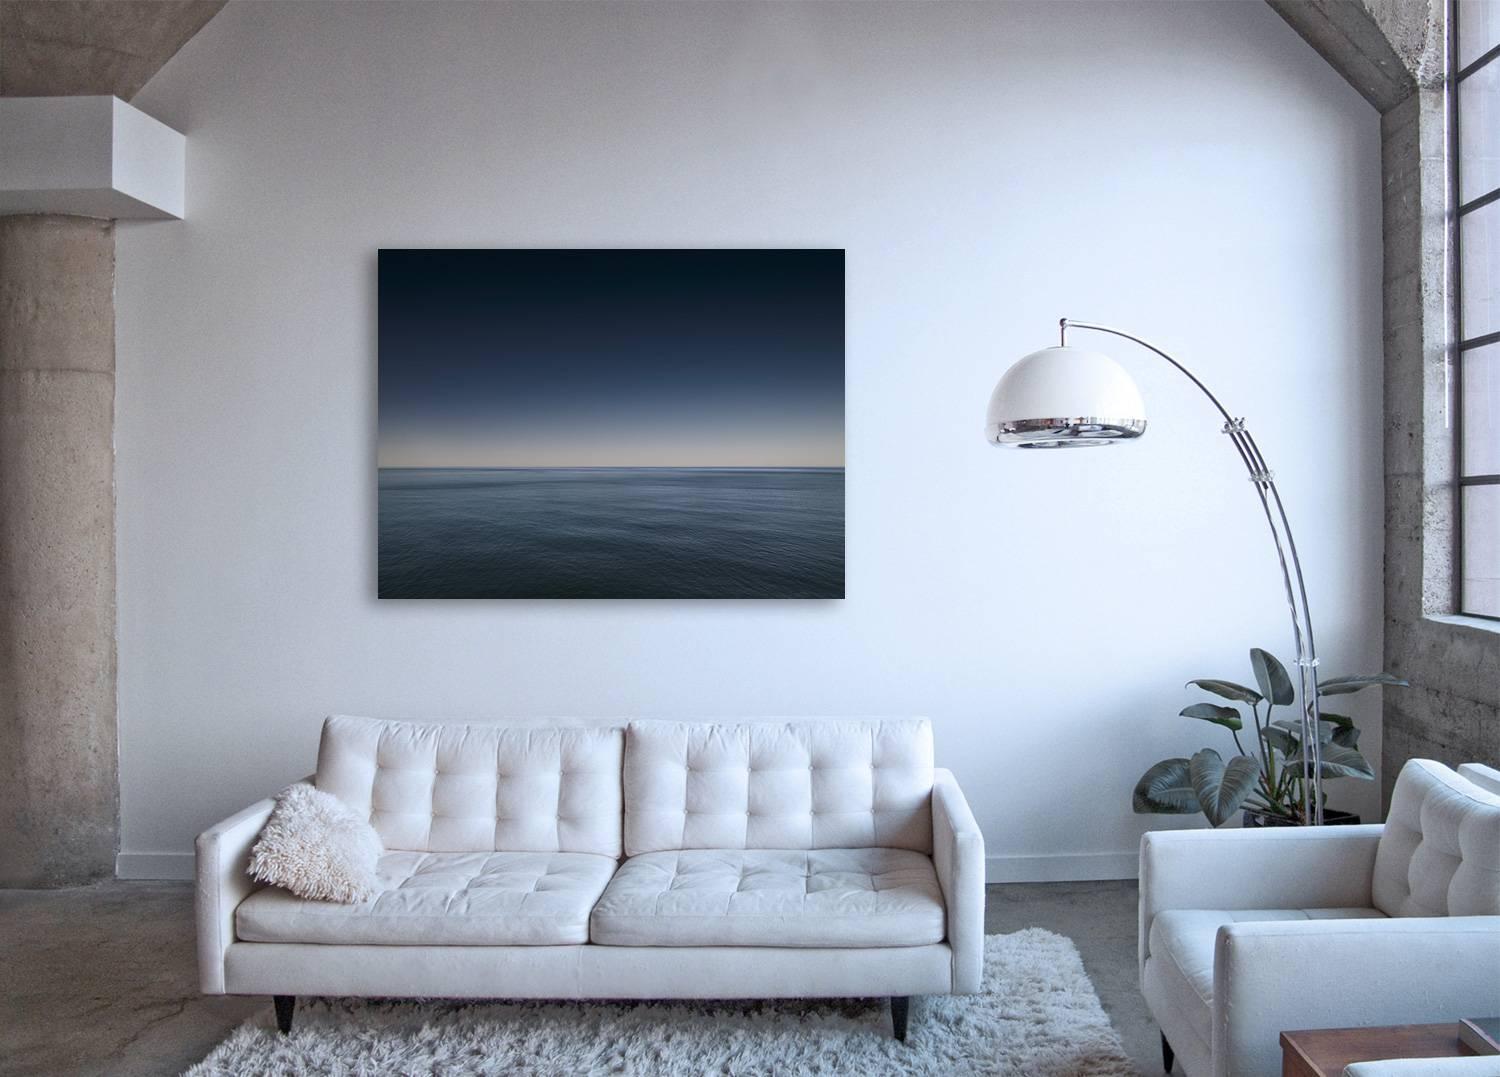 Seascape I (framed) - large format photograph of blue tone horizon and sea - Print by Frank Schott